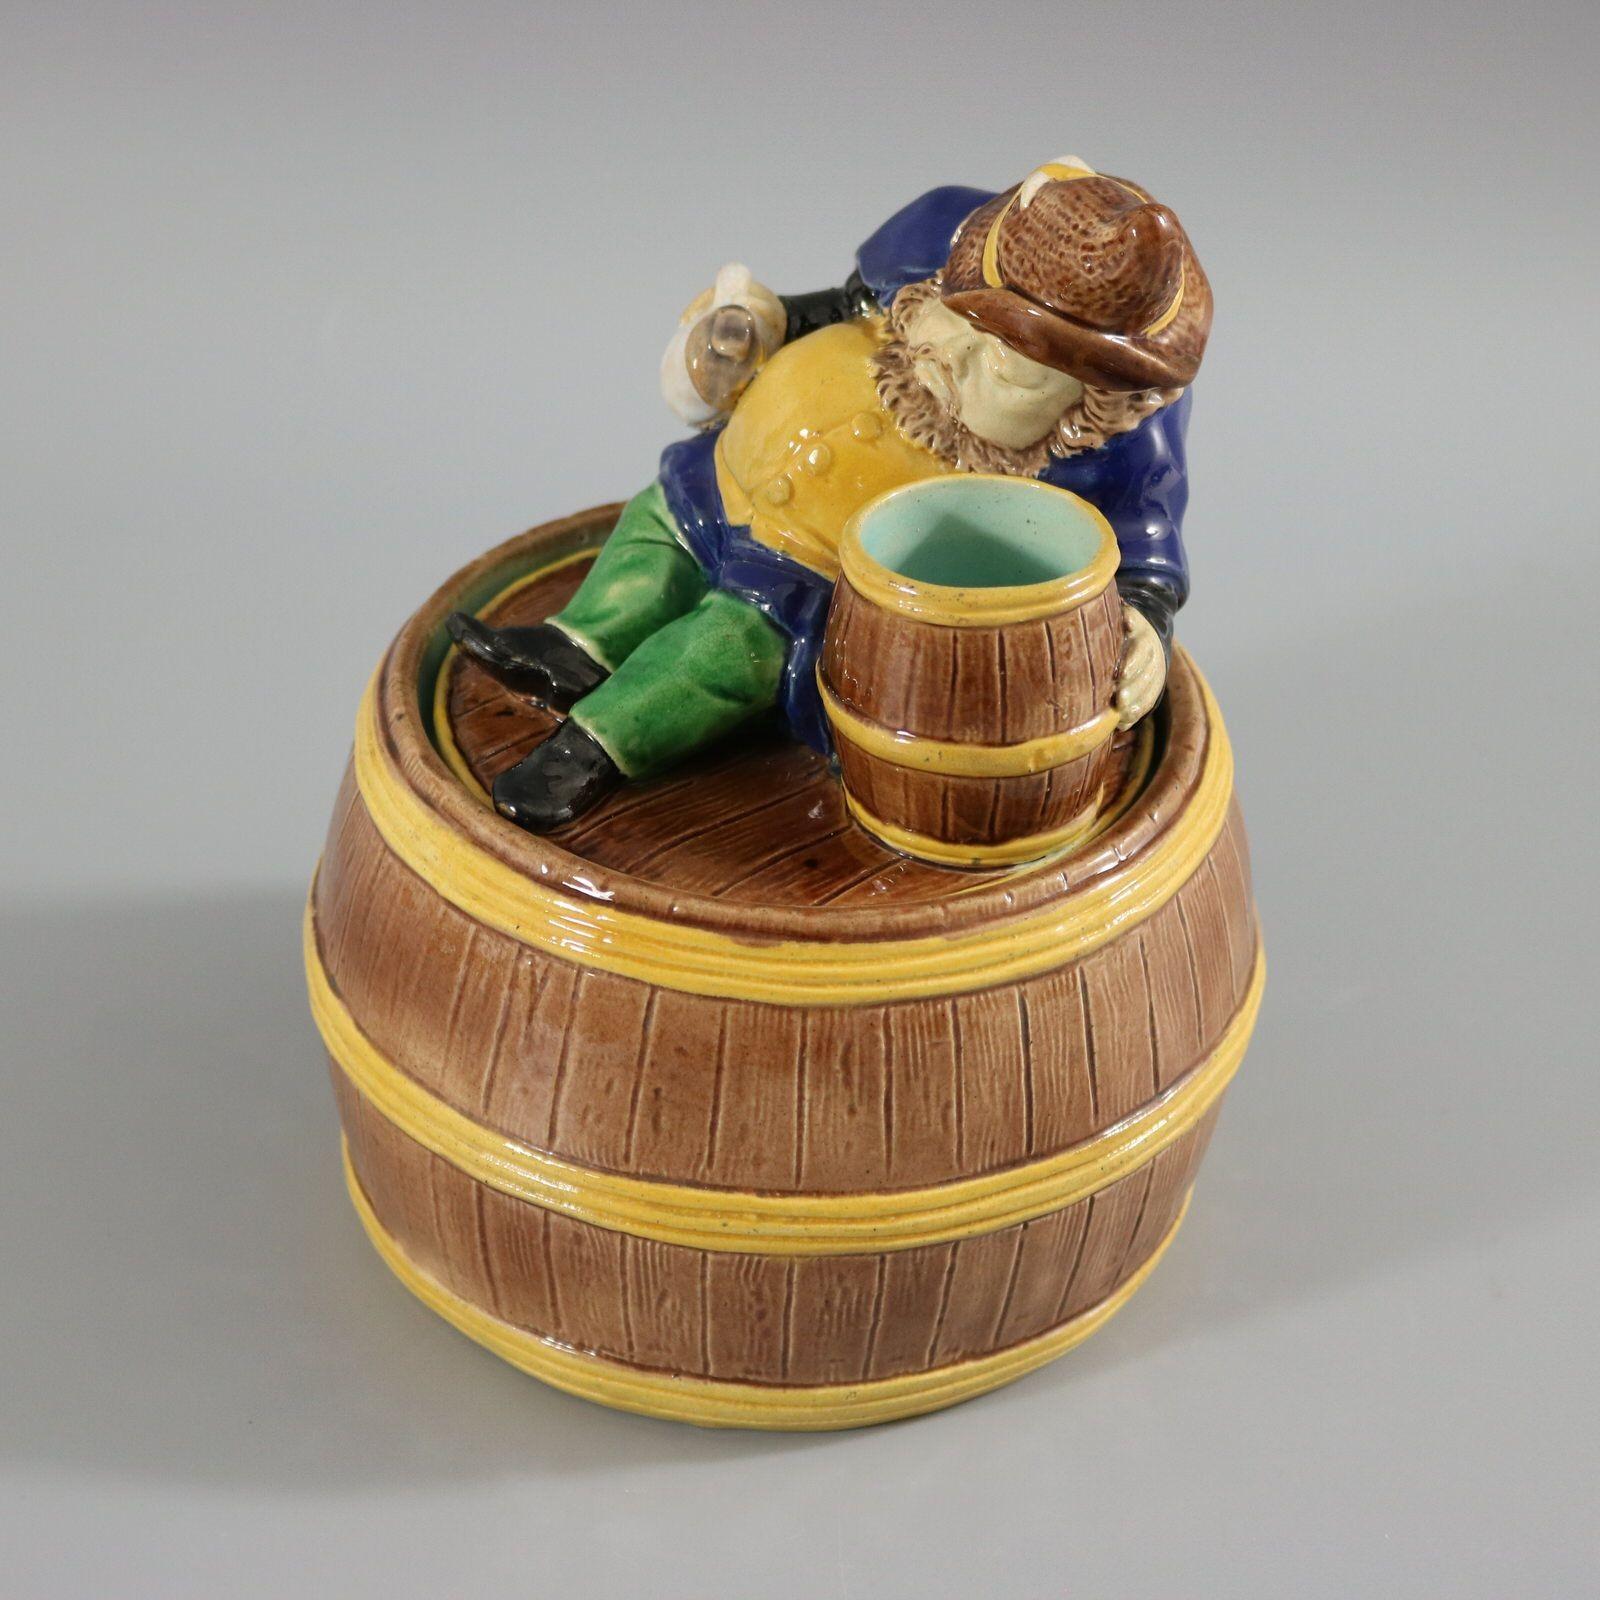 Unidentified English Majolica pot and cover which features a gnome (or dwarf) laying down next to an ale barrel, with a drinking jug in his right hand. The base in the form of a barrel. Colouration: brown, yellow, cobalt blue, are predominant.